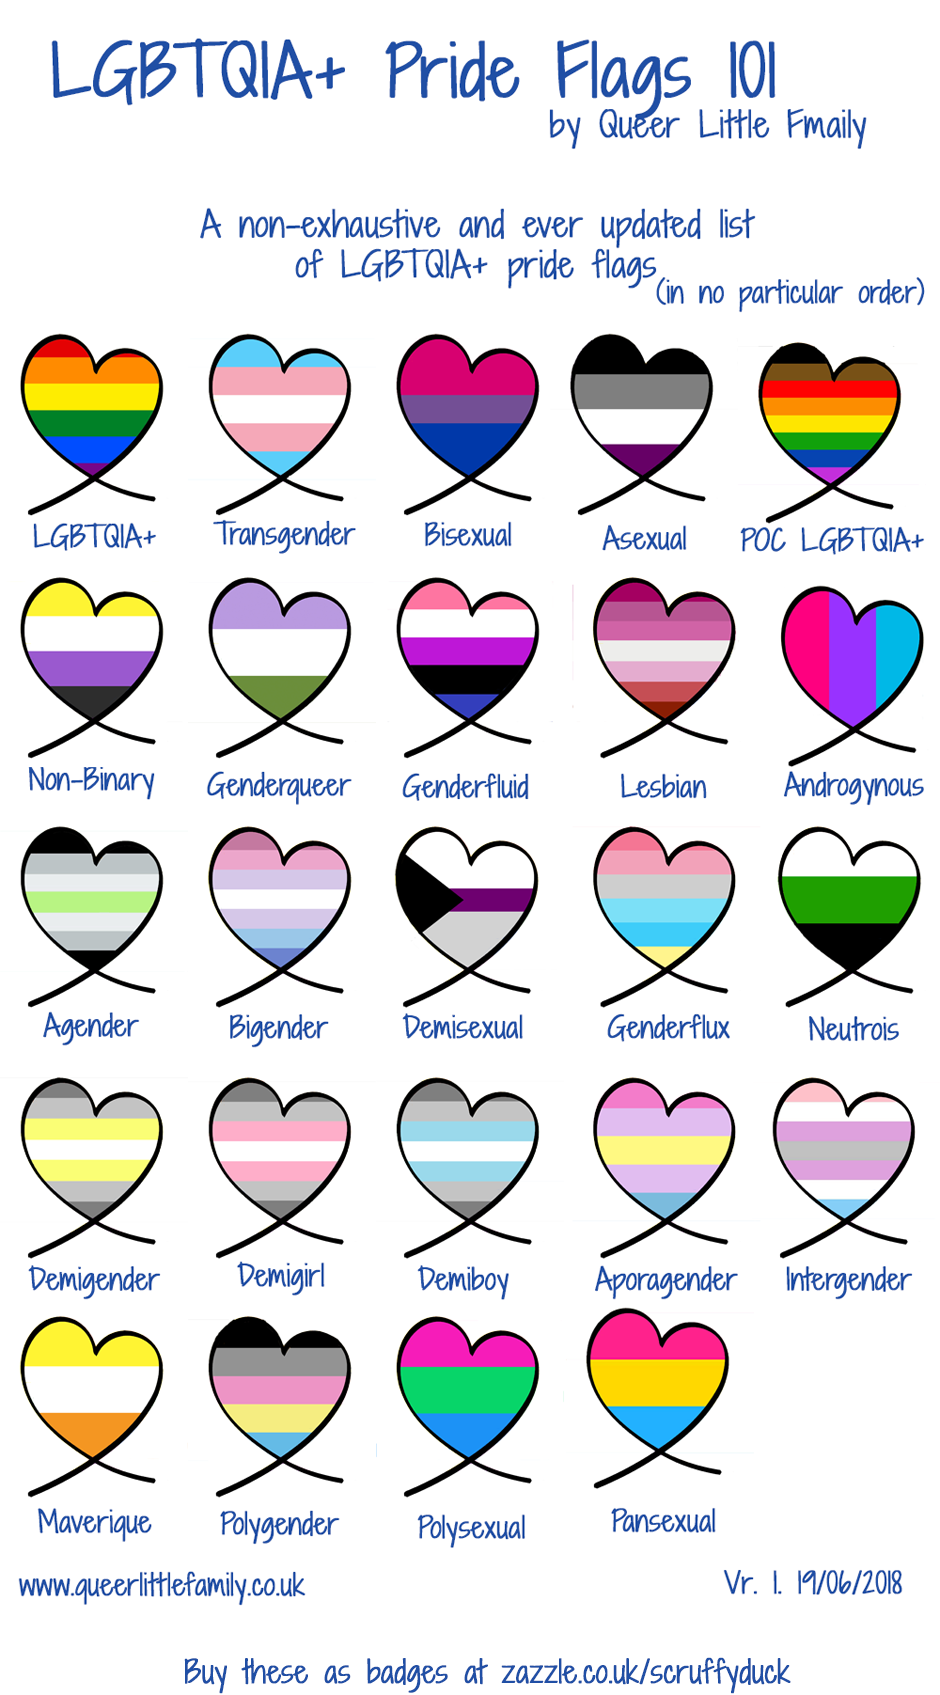 meaning of the colors in the gay pride flag